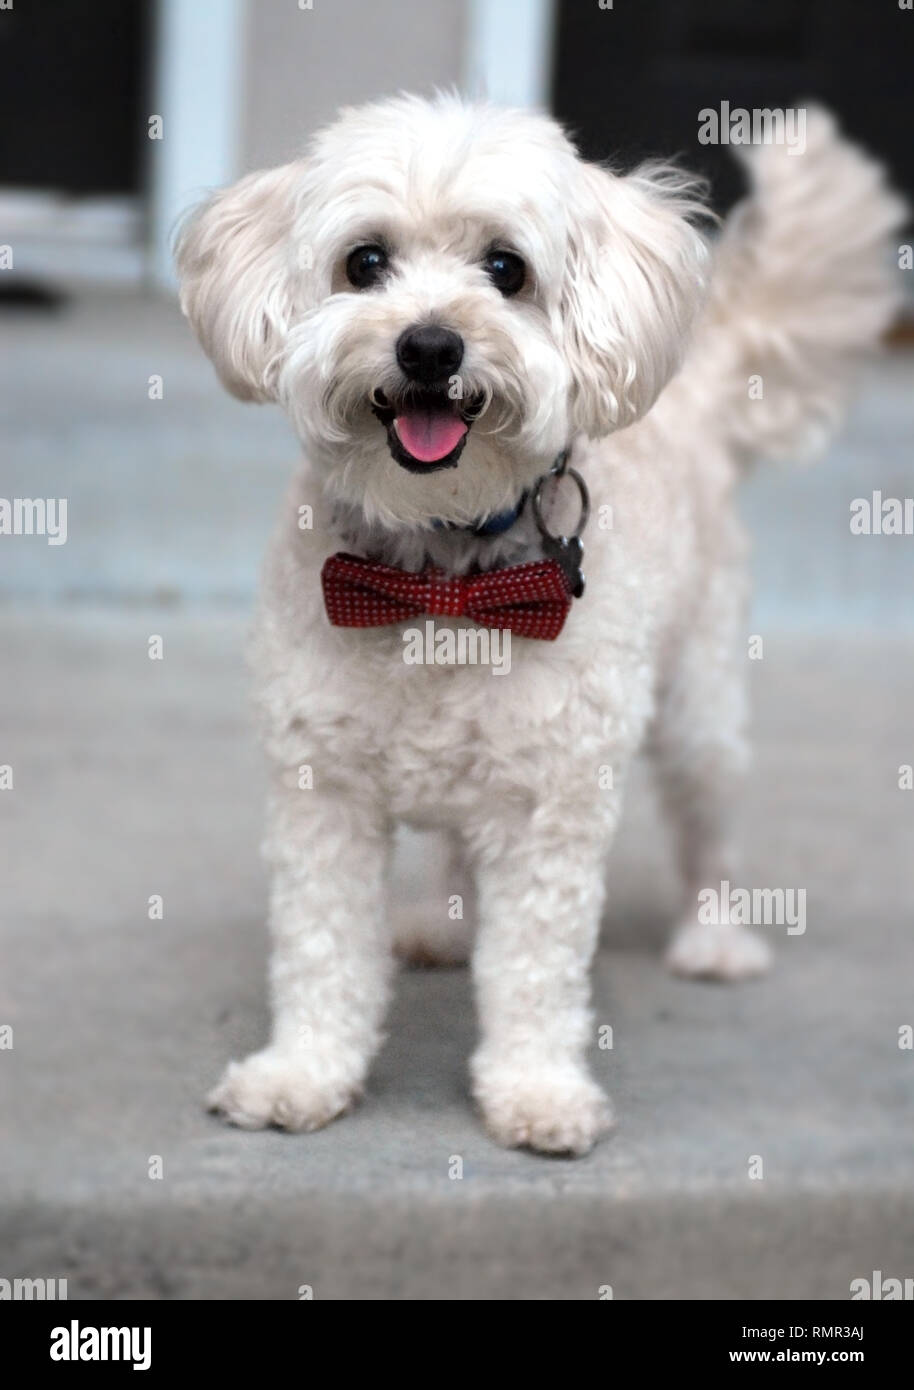 White poodle mix dog wearing a red bow tie Stock Photo